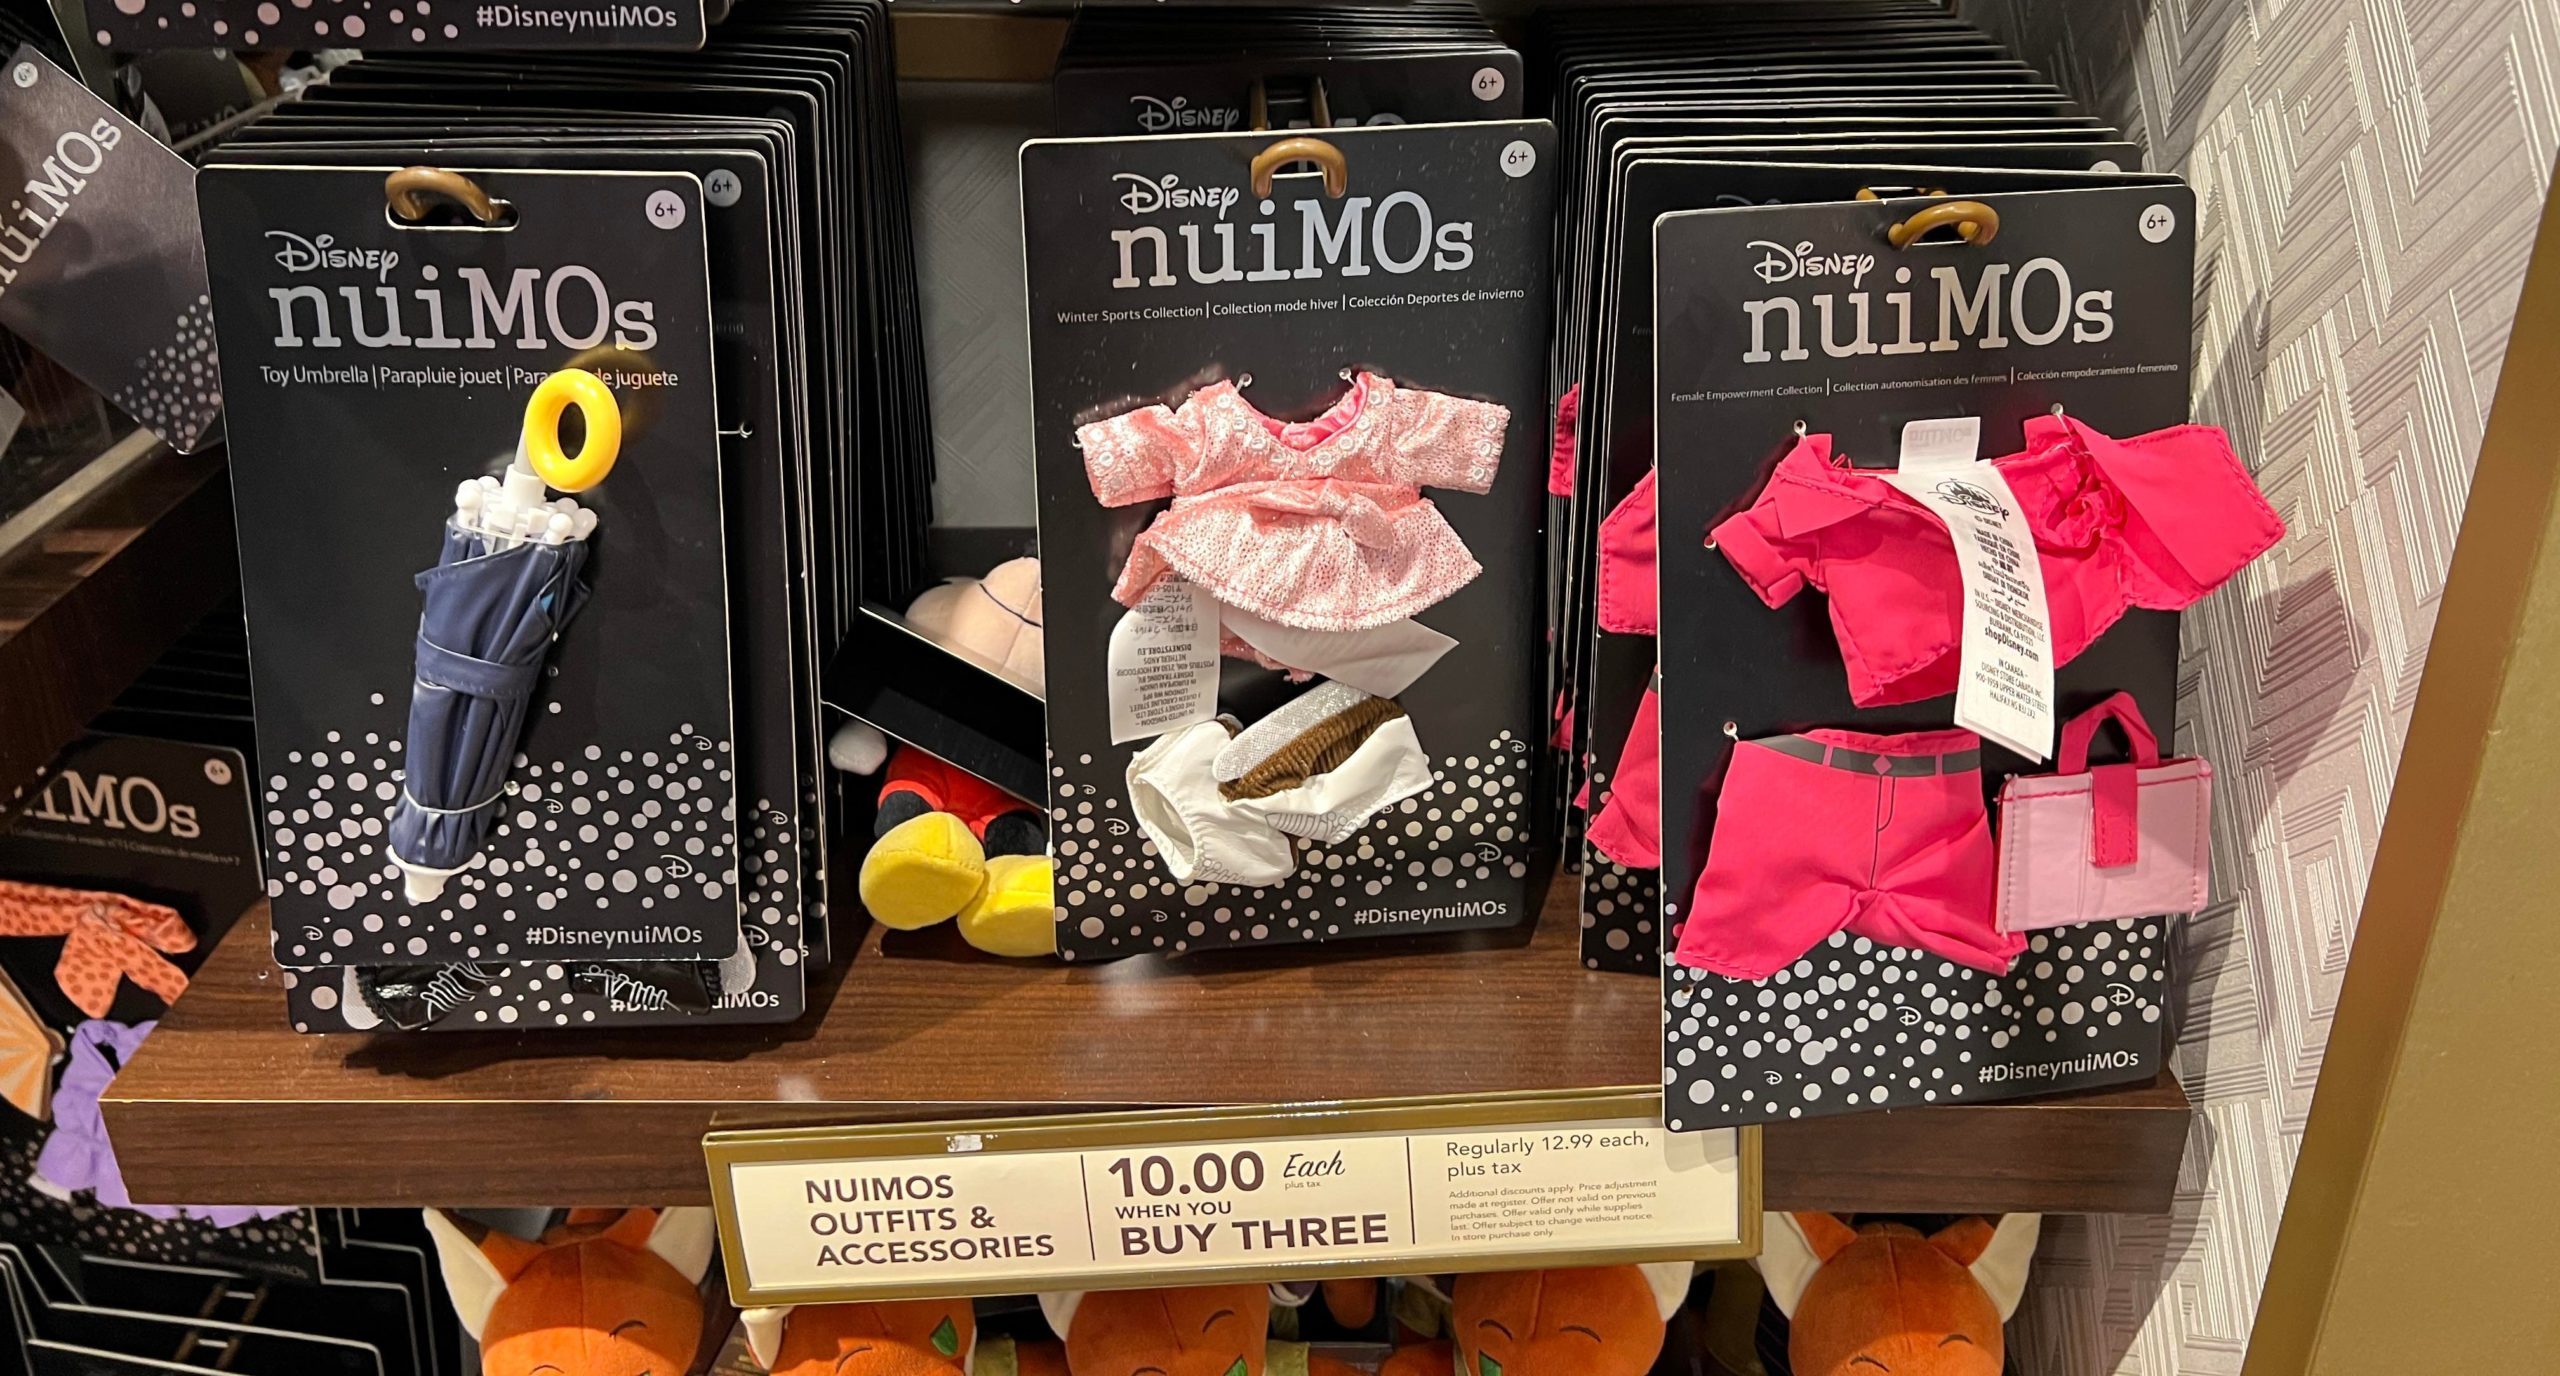 Where to Buy nuiMOs Accessories